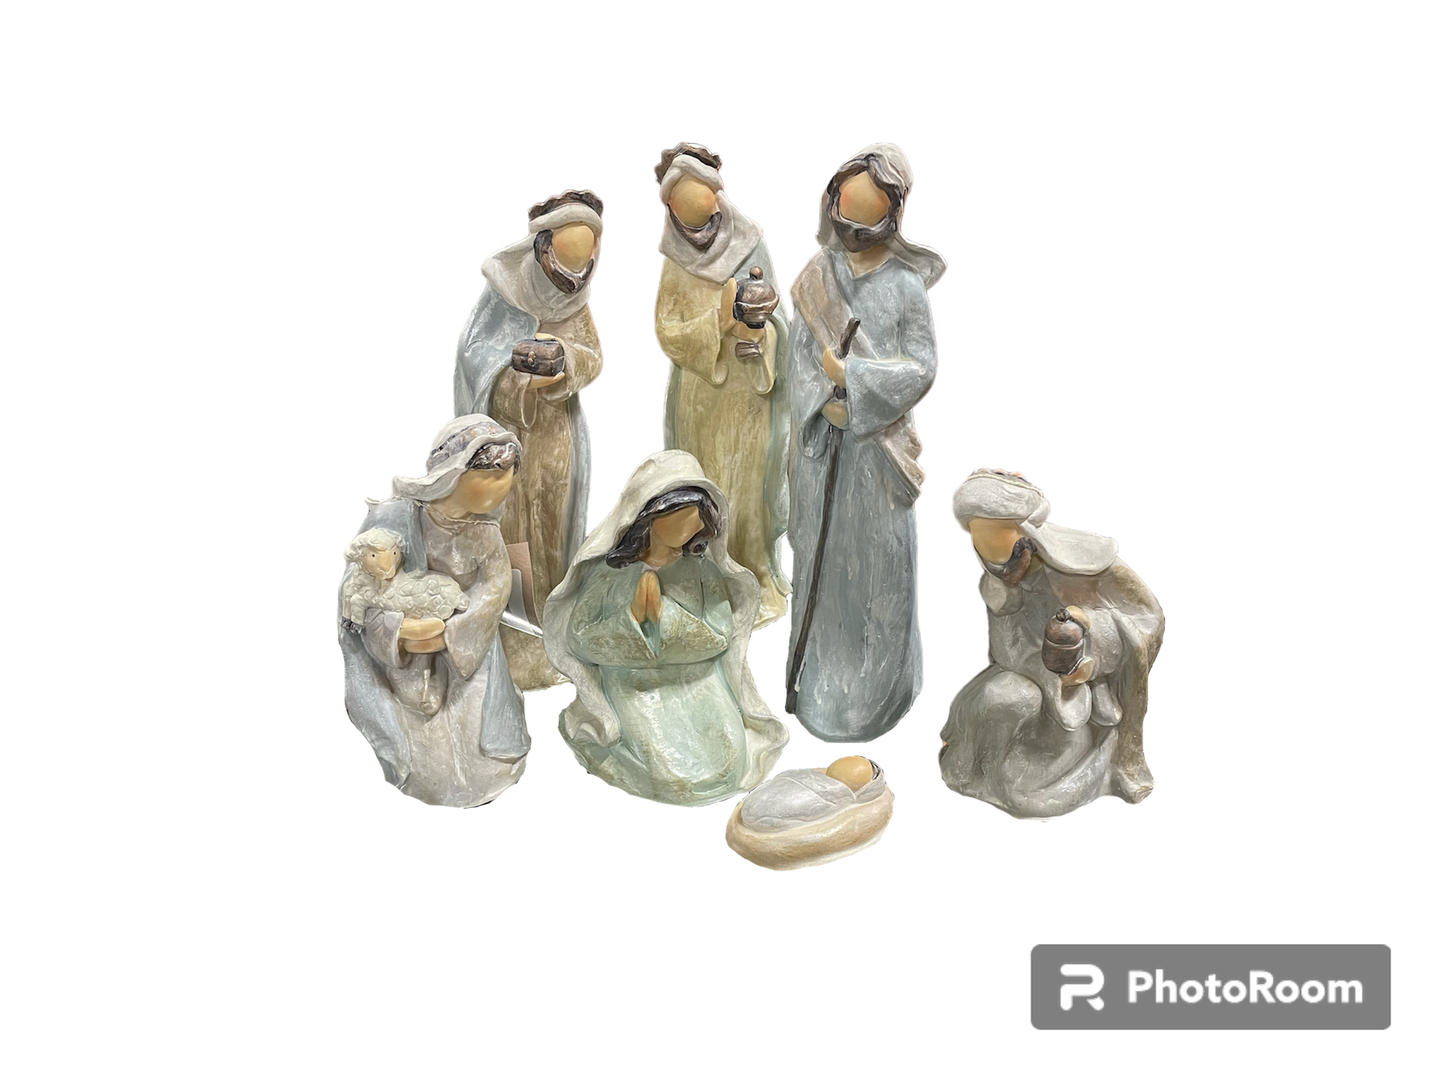 7 Pc Res Pastel/Pearl Nativity